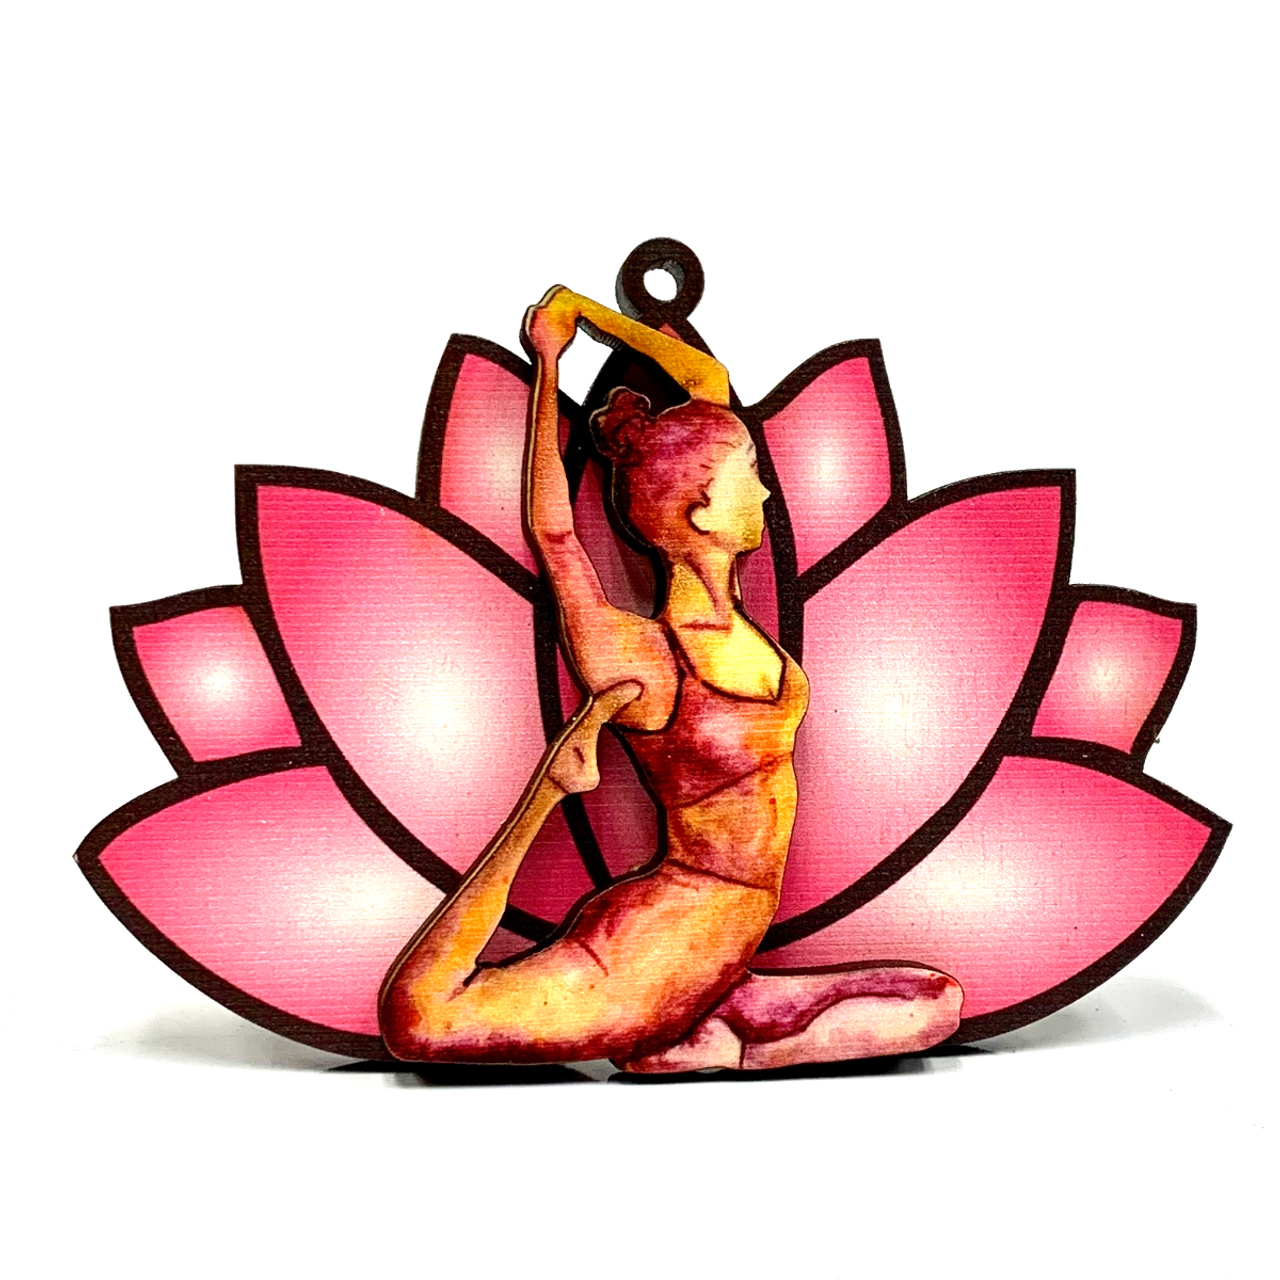 4 yoga poses inspired by flowers | bloomon